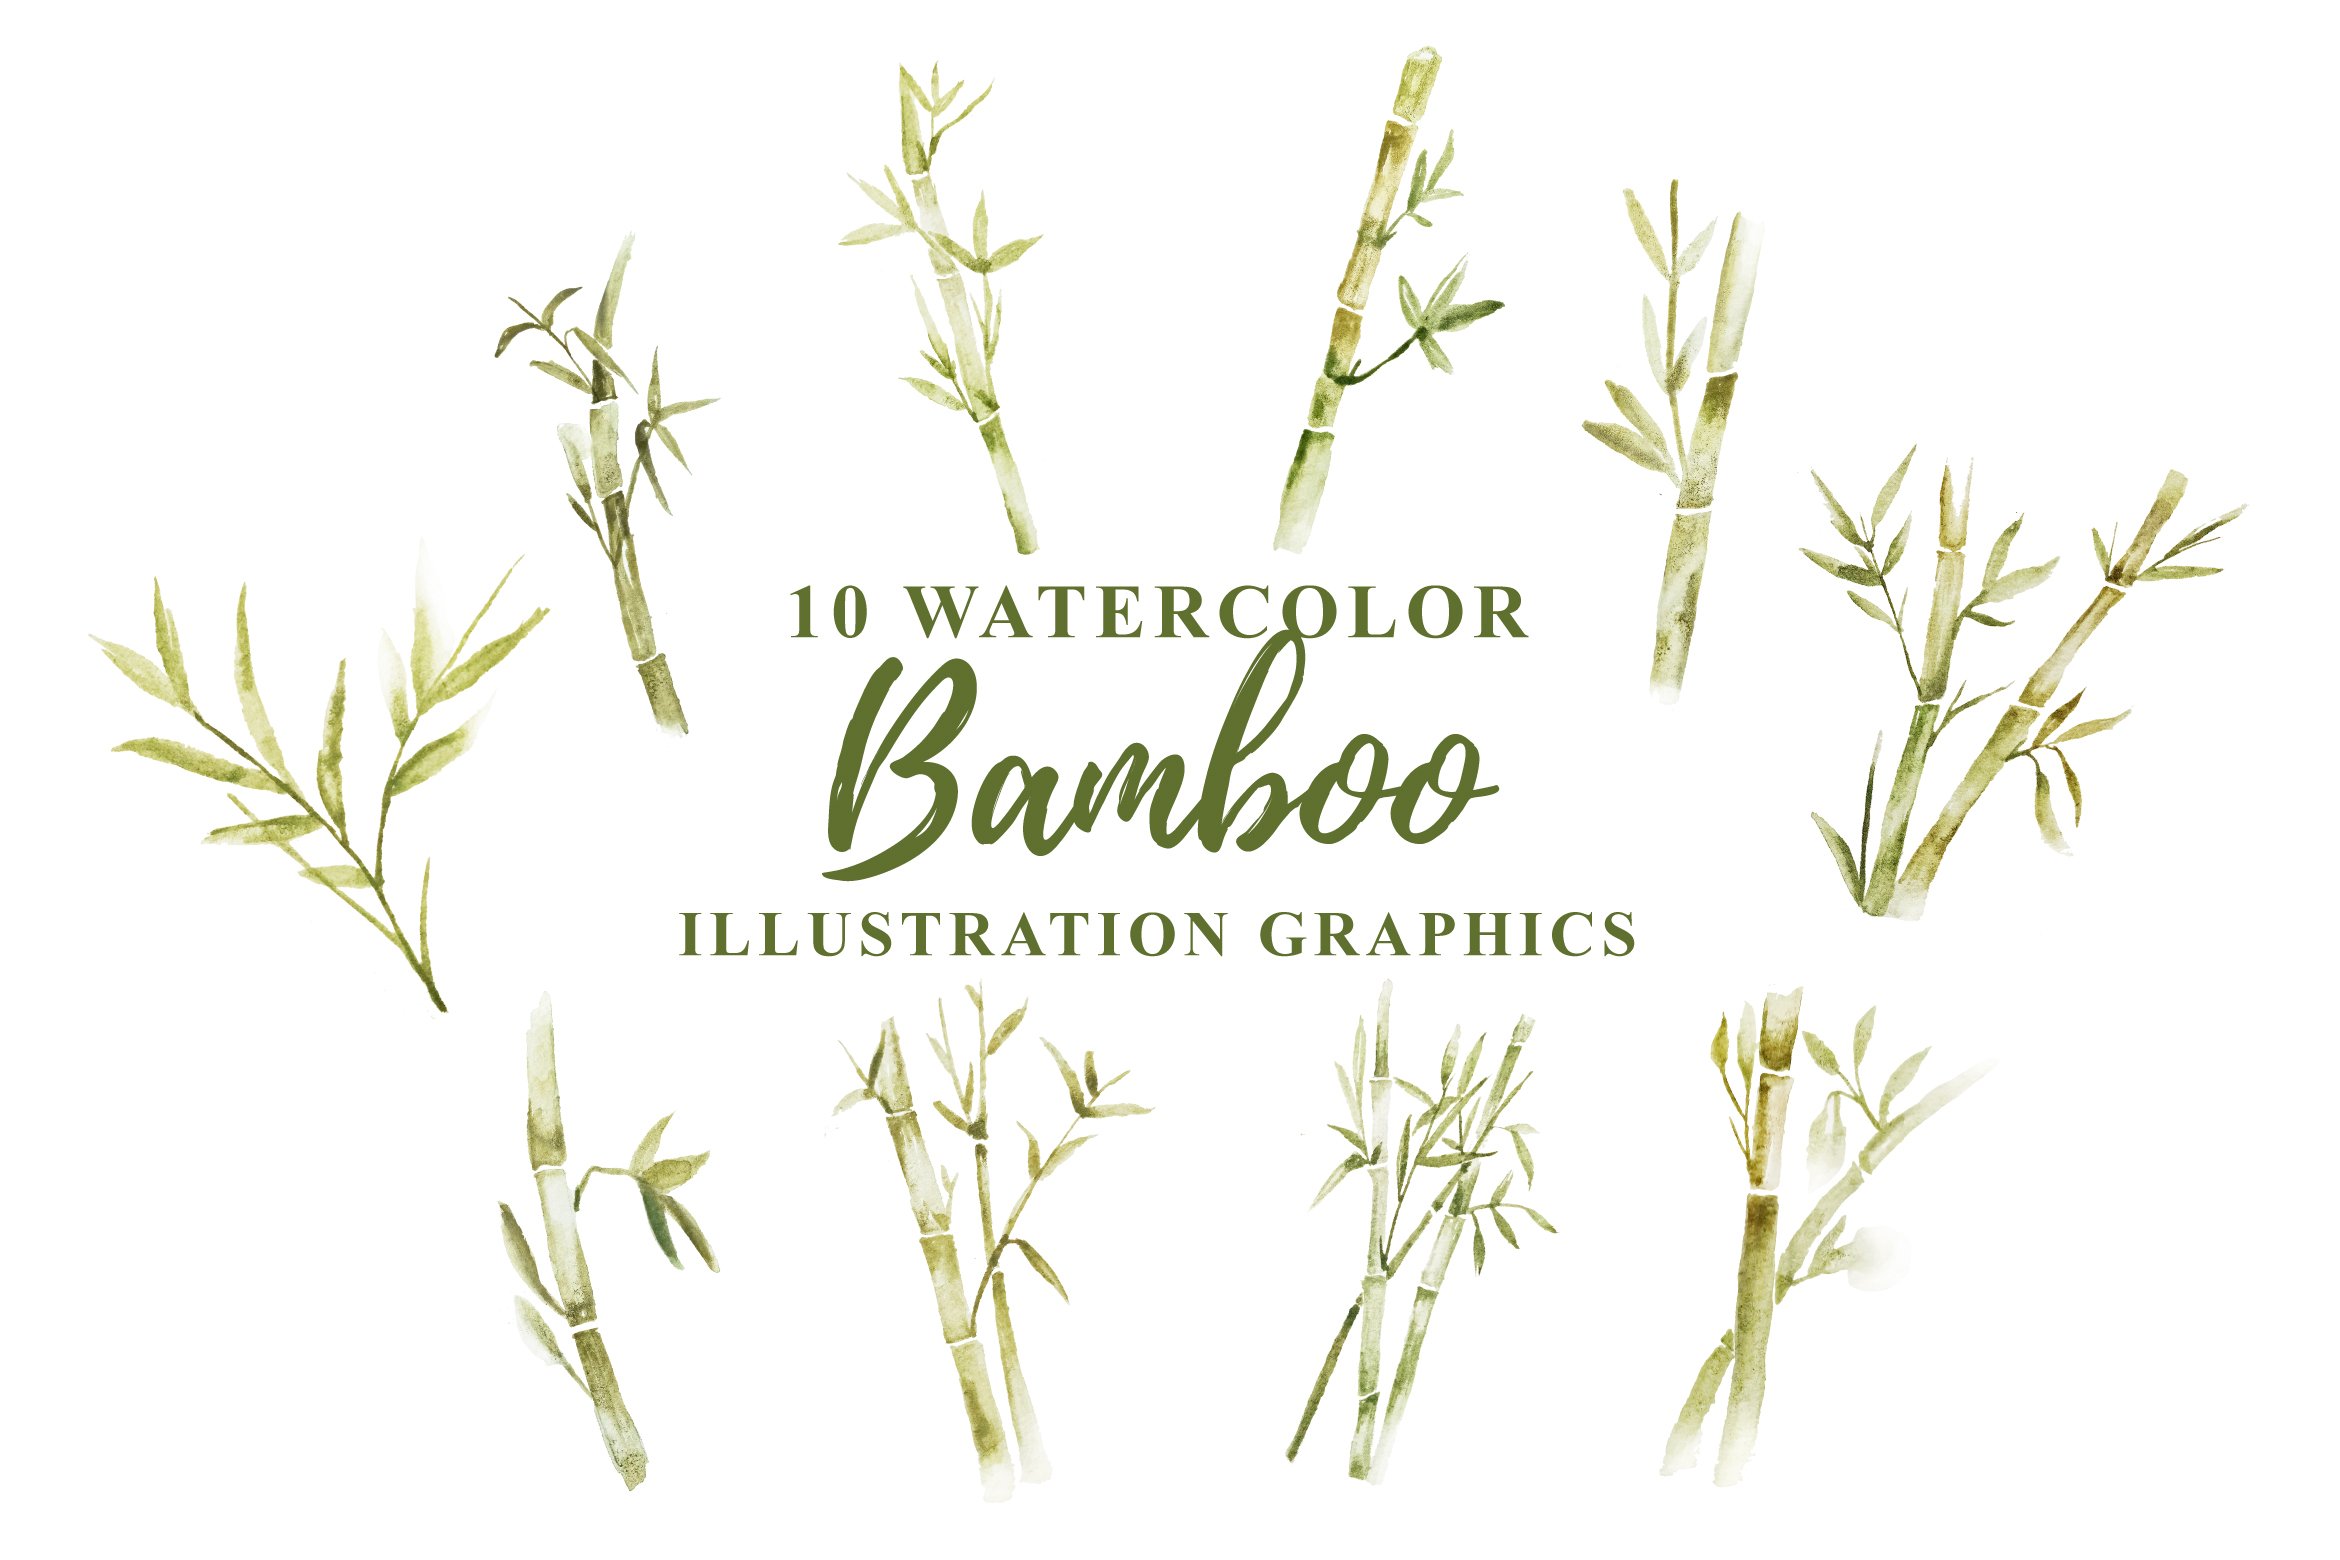 Bunch of bamboo plants with the words 10 watercolor bamboo illustration graphics.